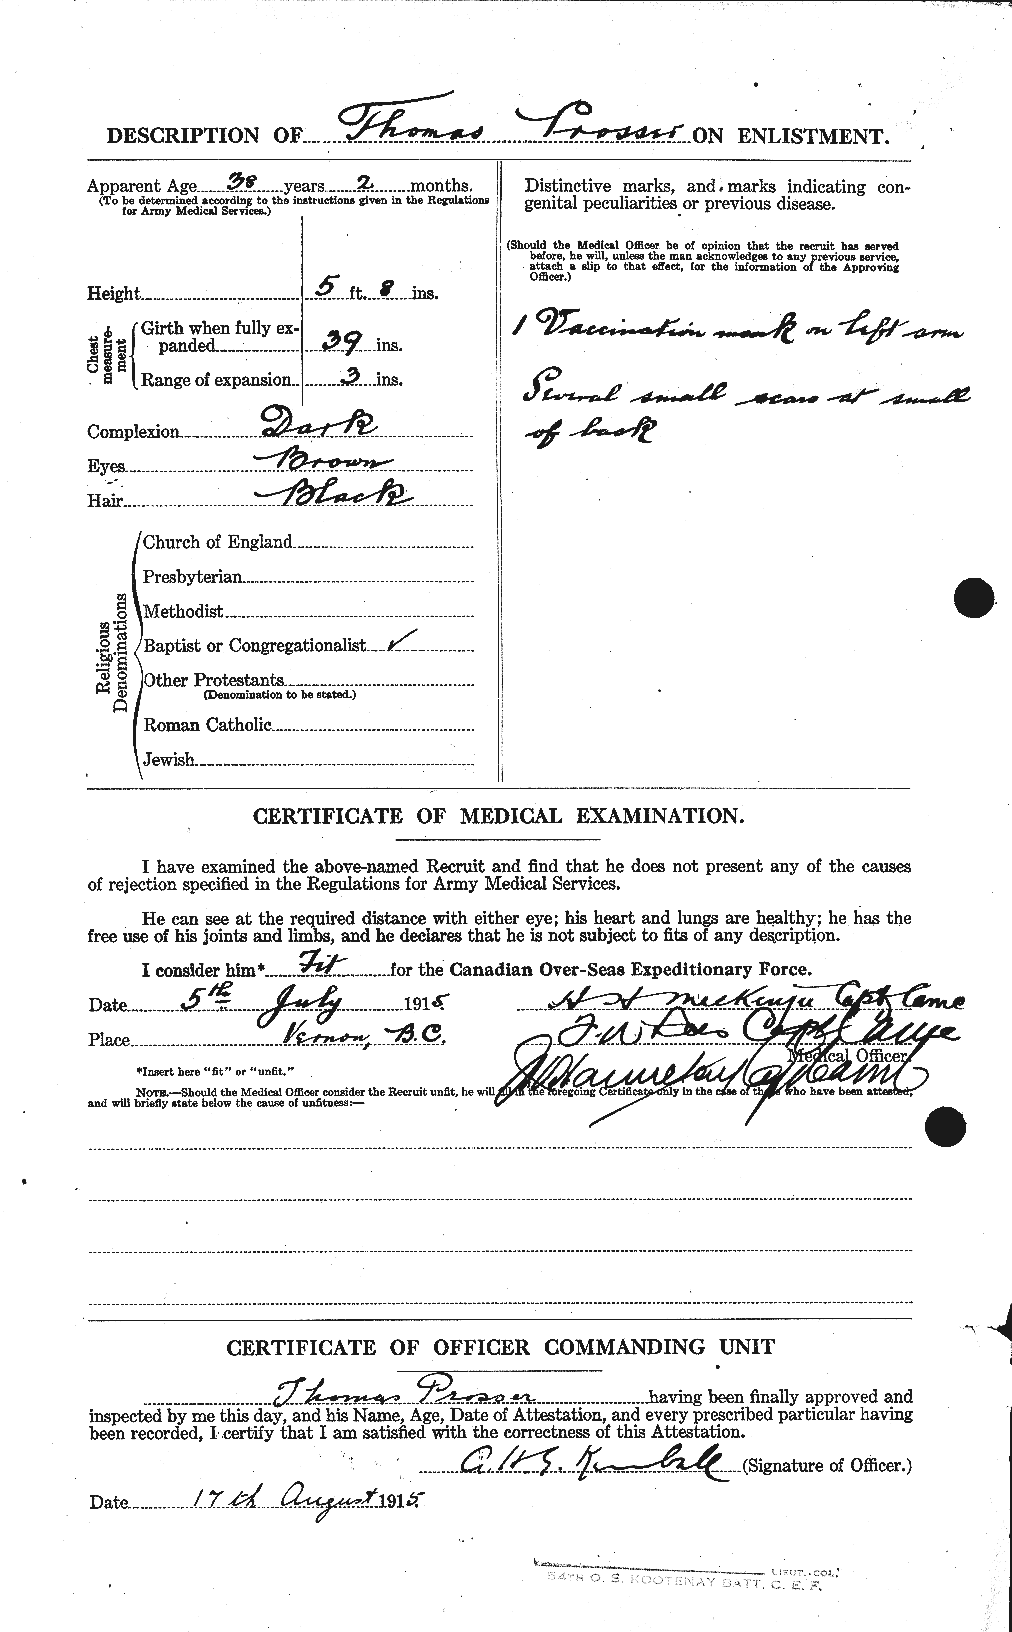 Personnel Records of the First World War - CEF 591391b